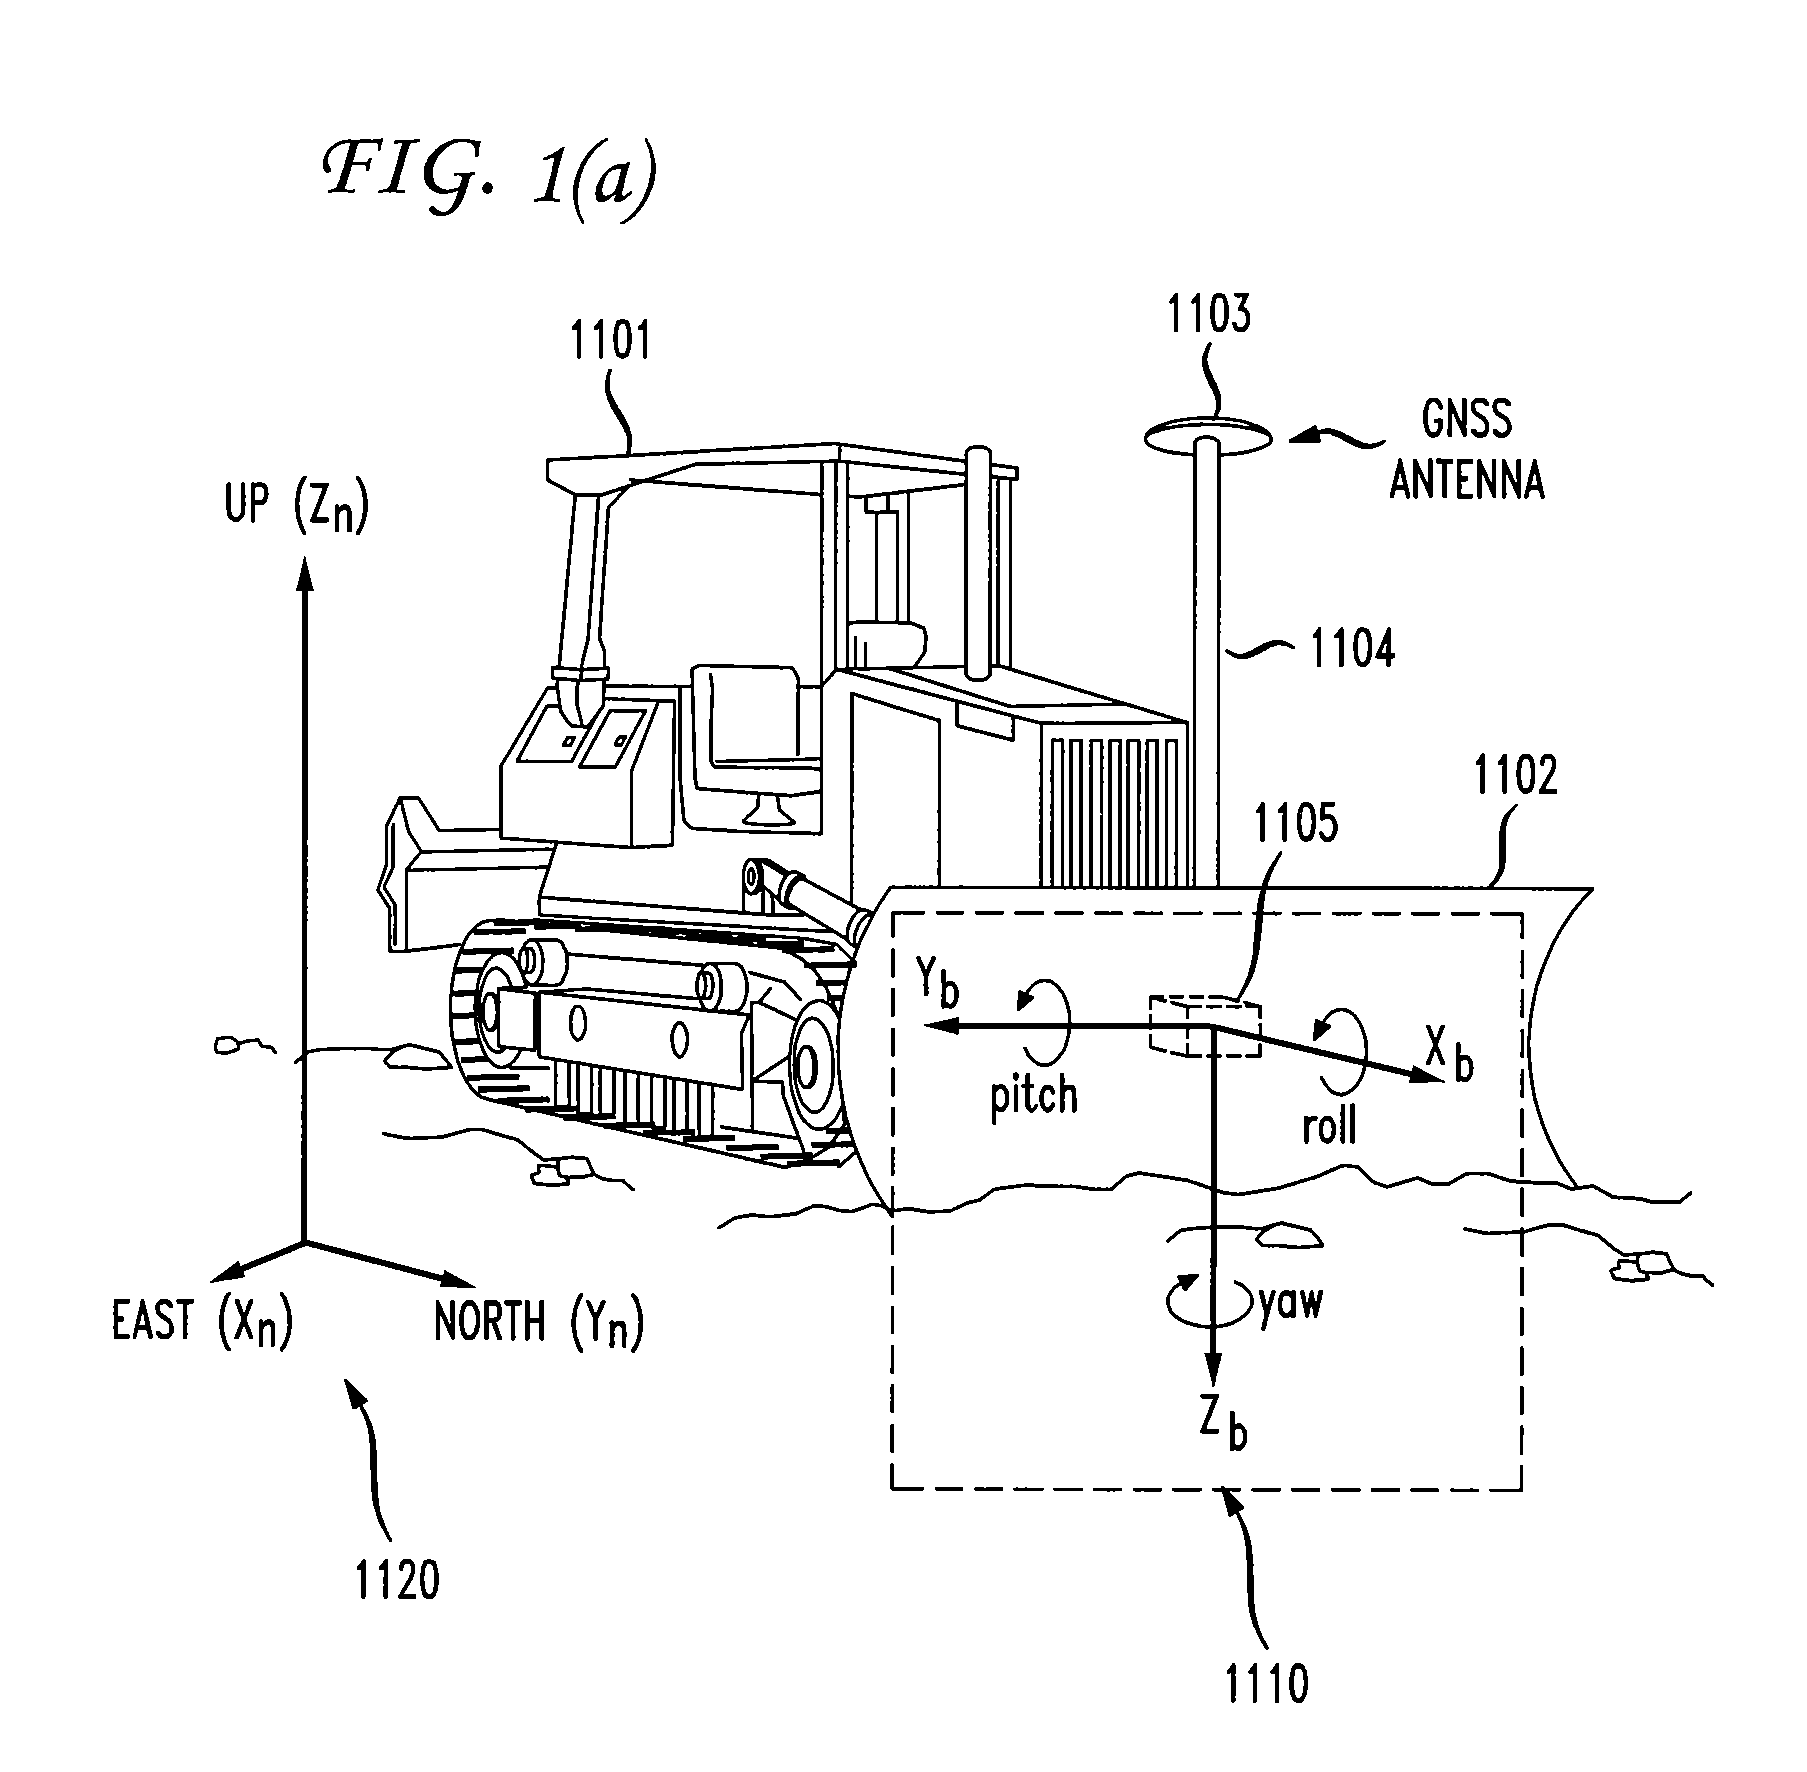 Automatic blade control system with integrated global navigation satellite system and inertial sensors